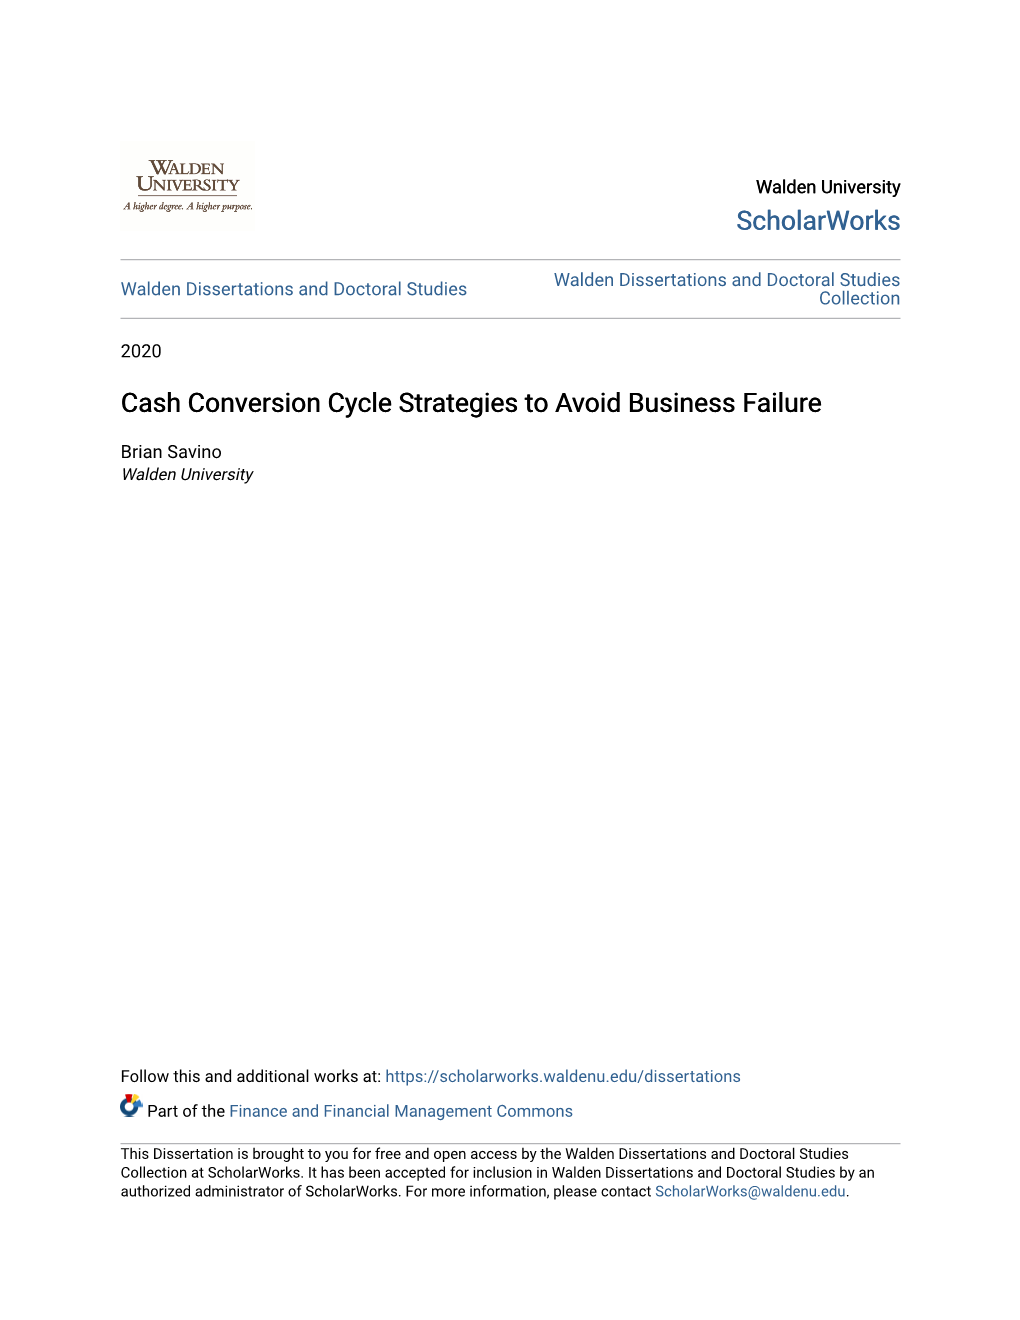 Cash Conversion Cycle Strategies to Avoid Business Failure